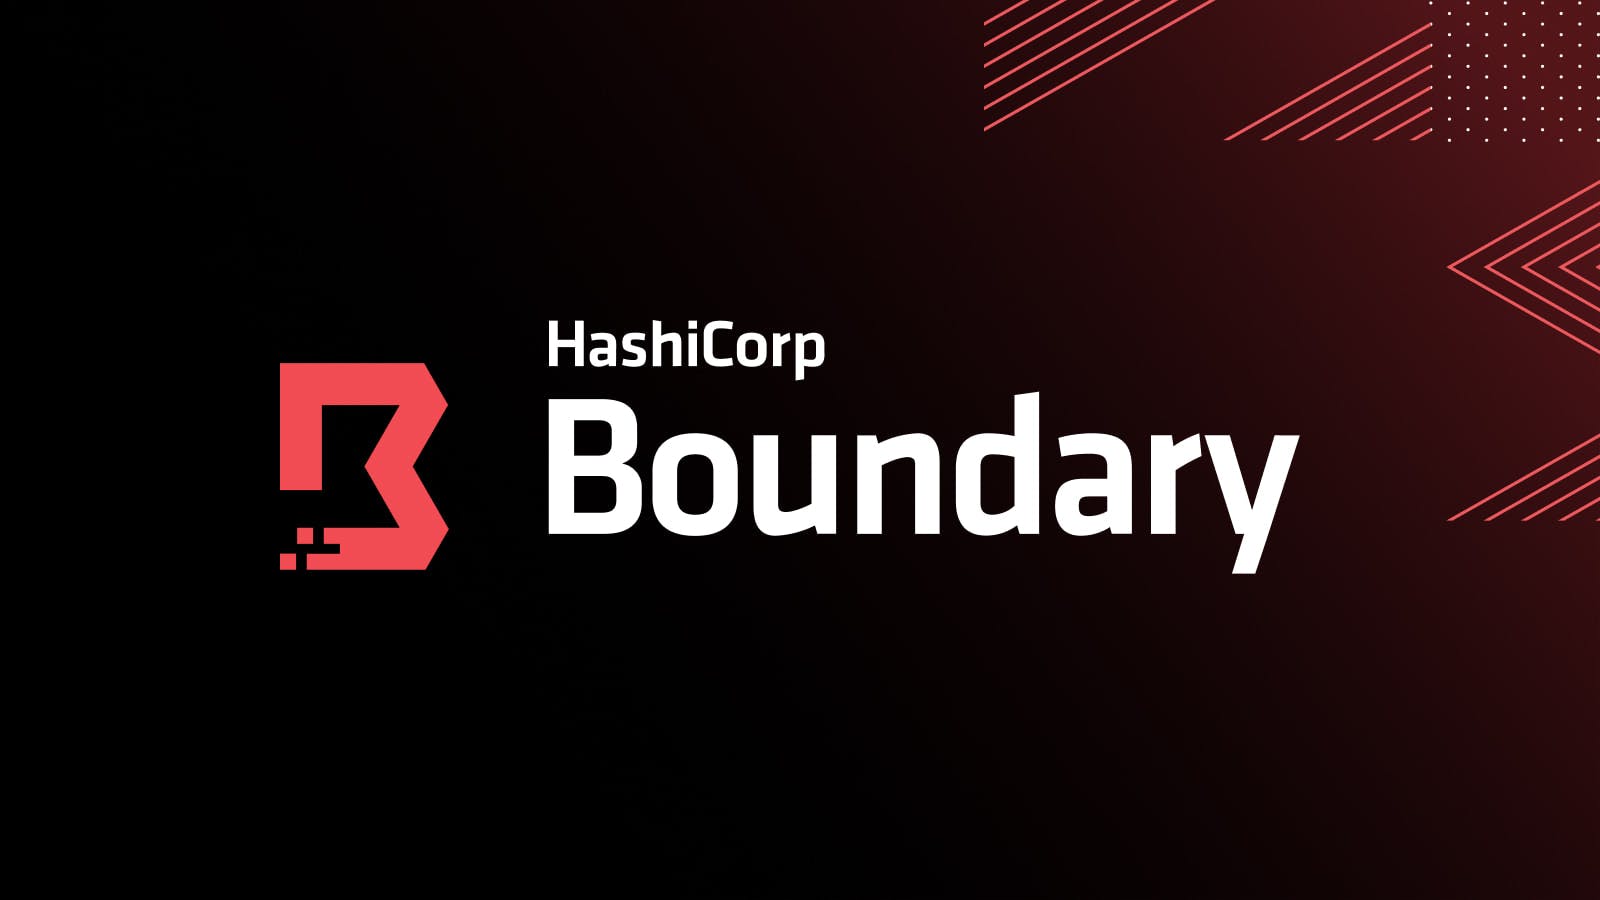 Boundary 0.12 introduces multi-hop sessions and SSH certificate injection